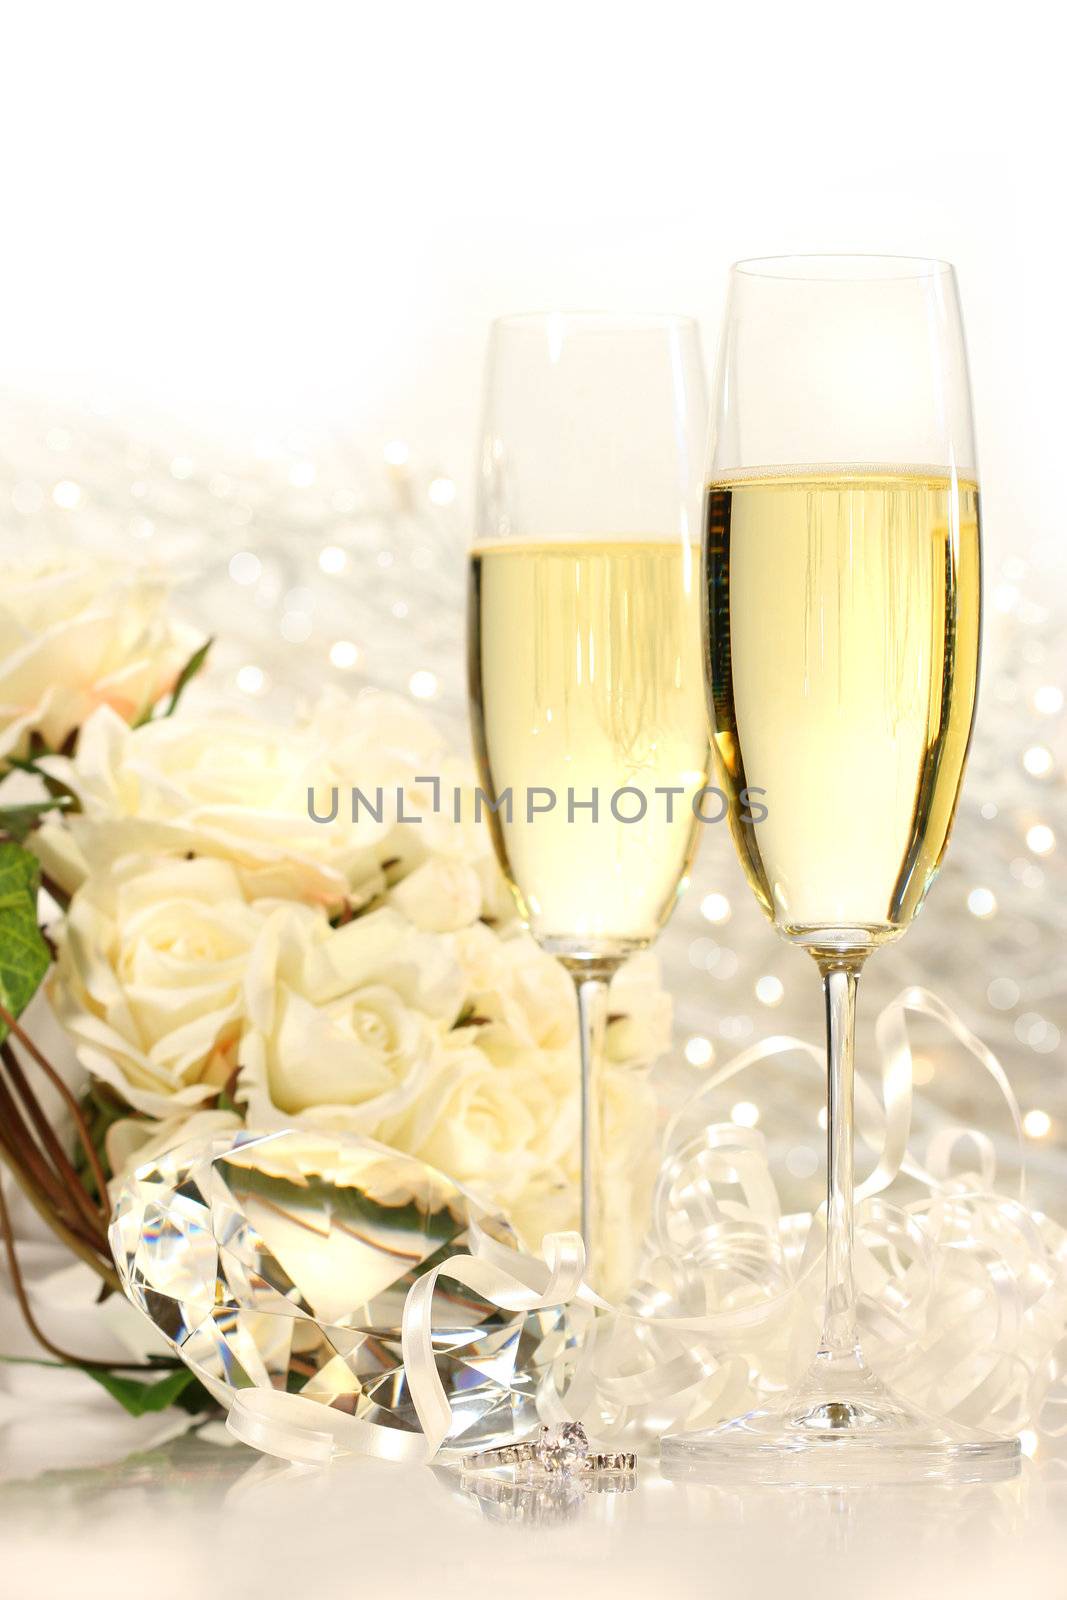 Champagne glasses ready for wedding festivities by Sandralise